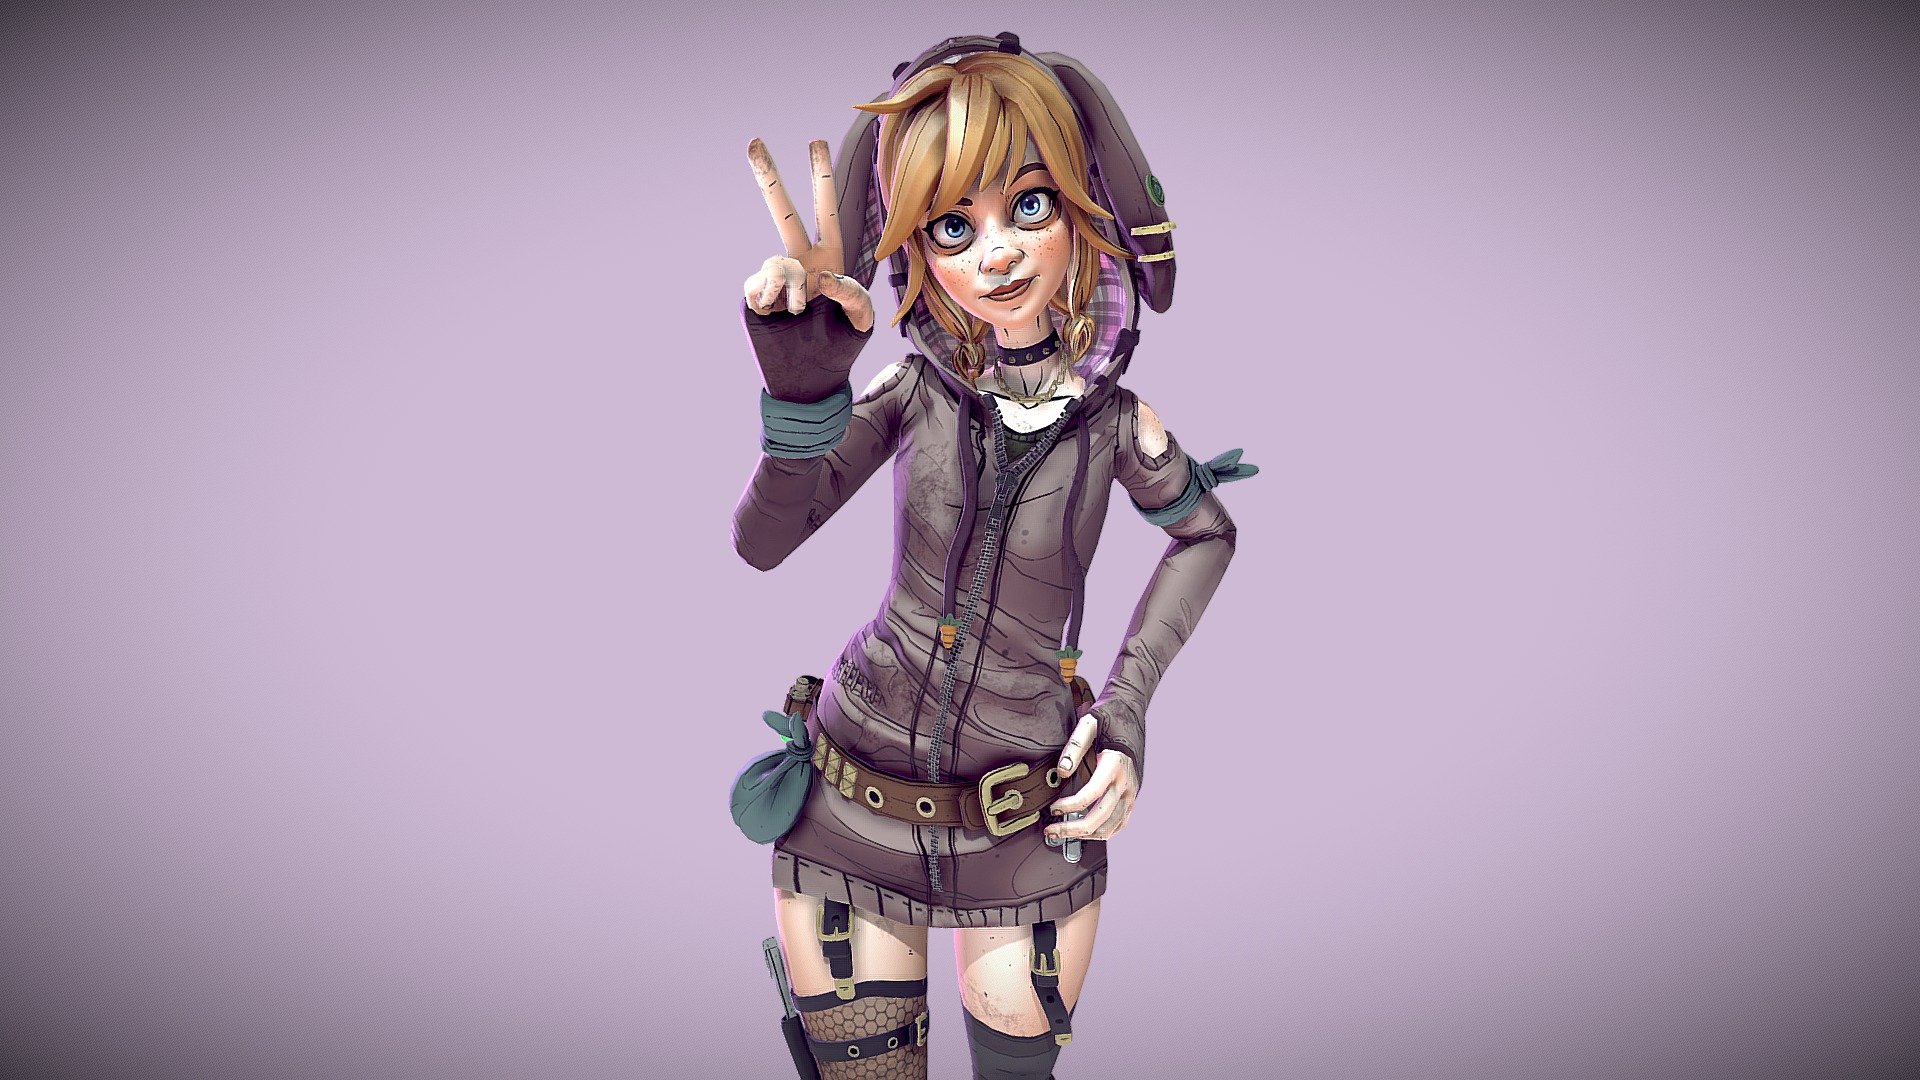 A Borderlands style character for a student project 3d model